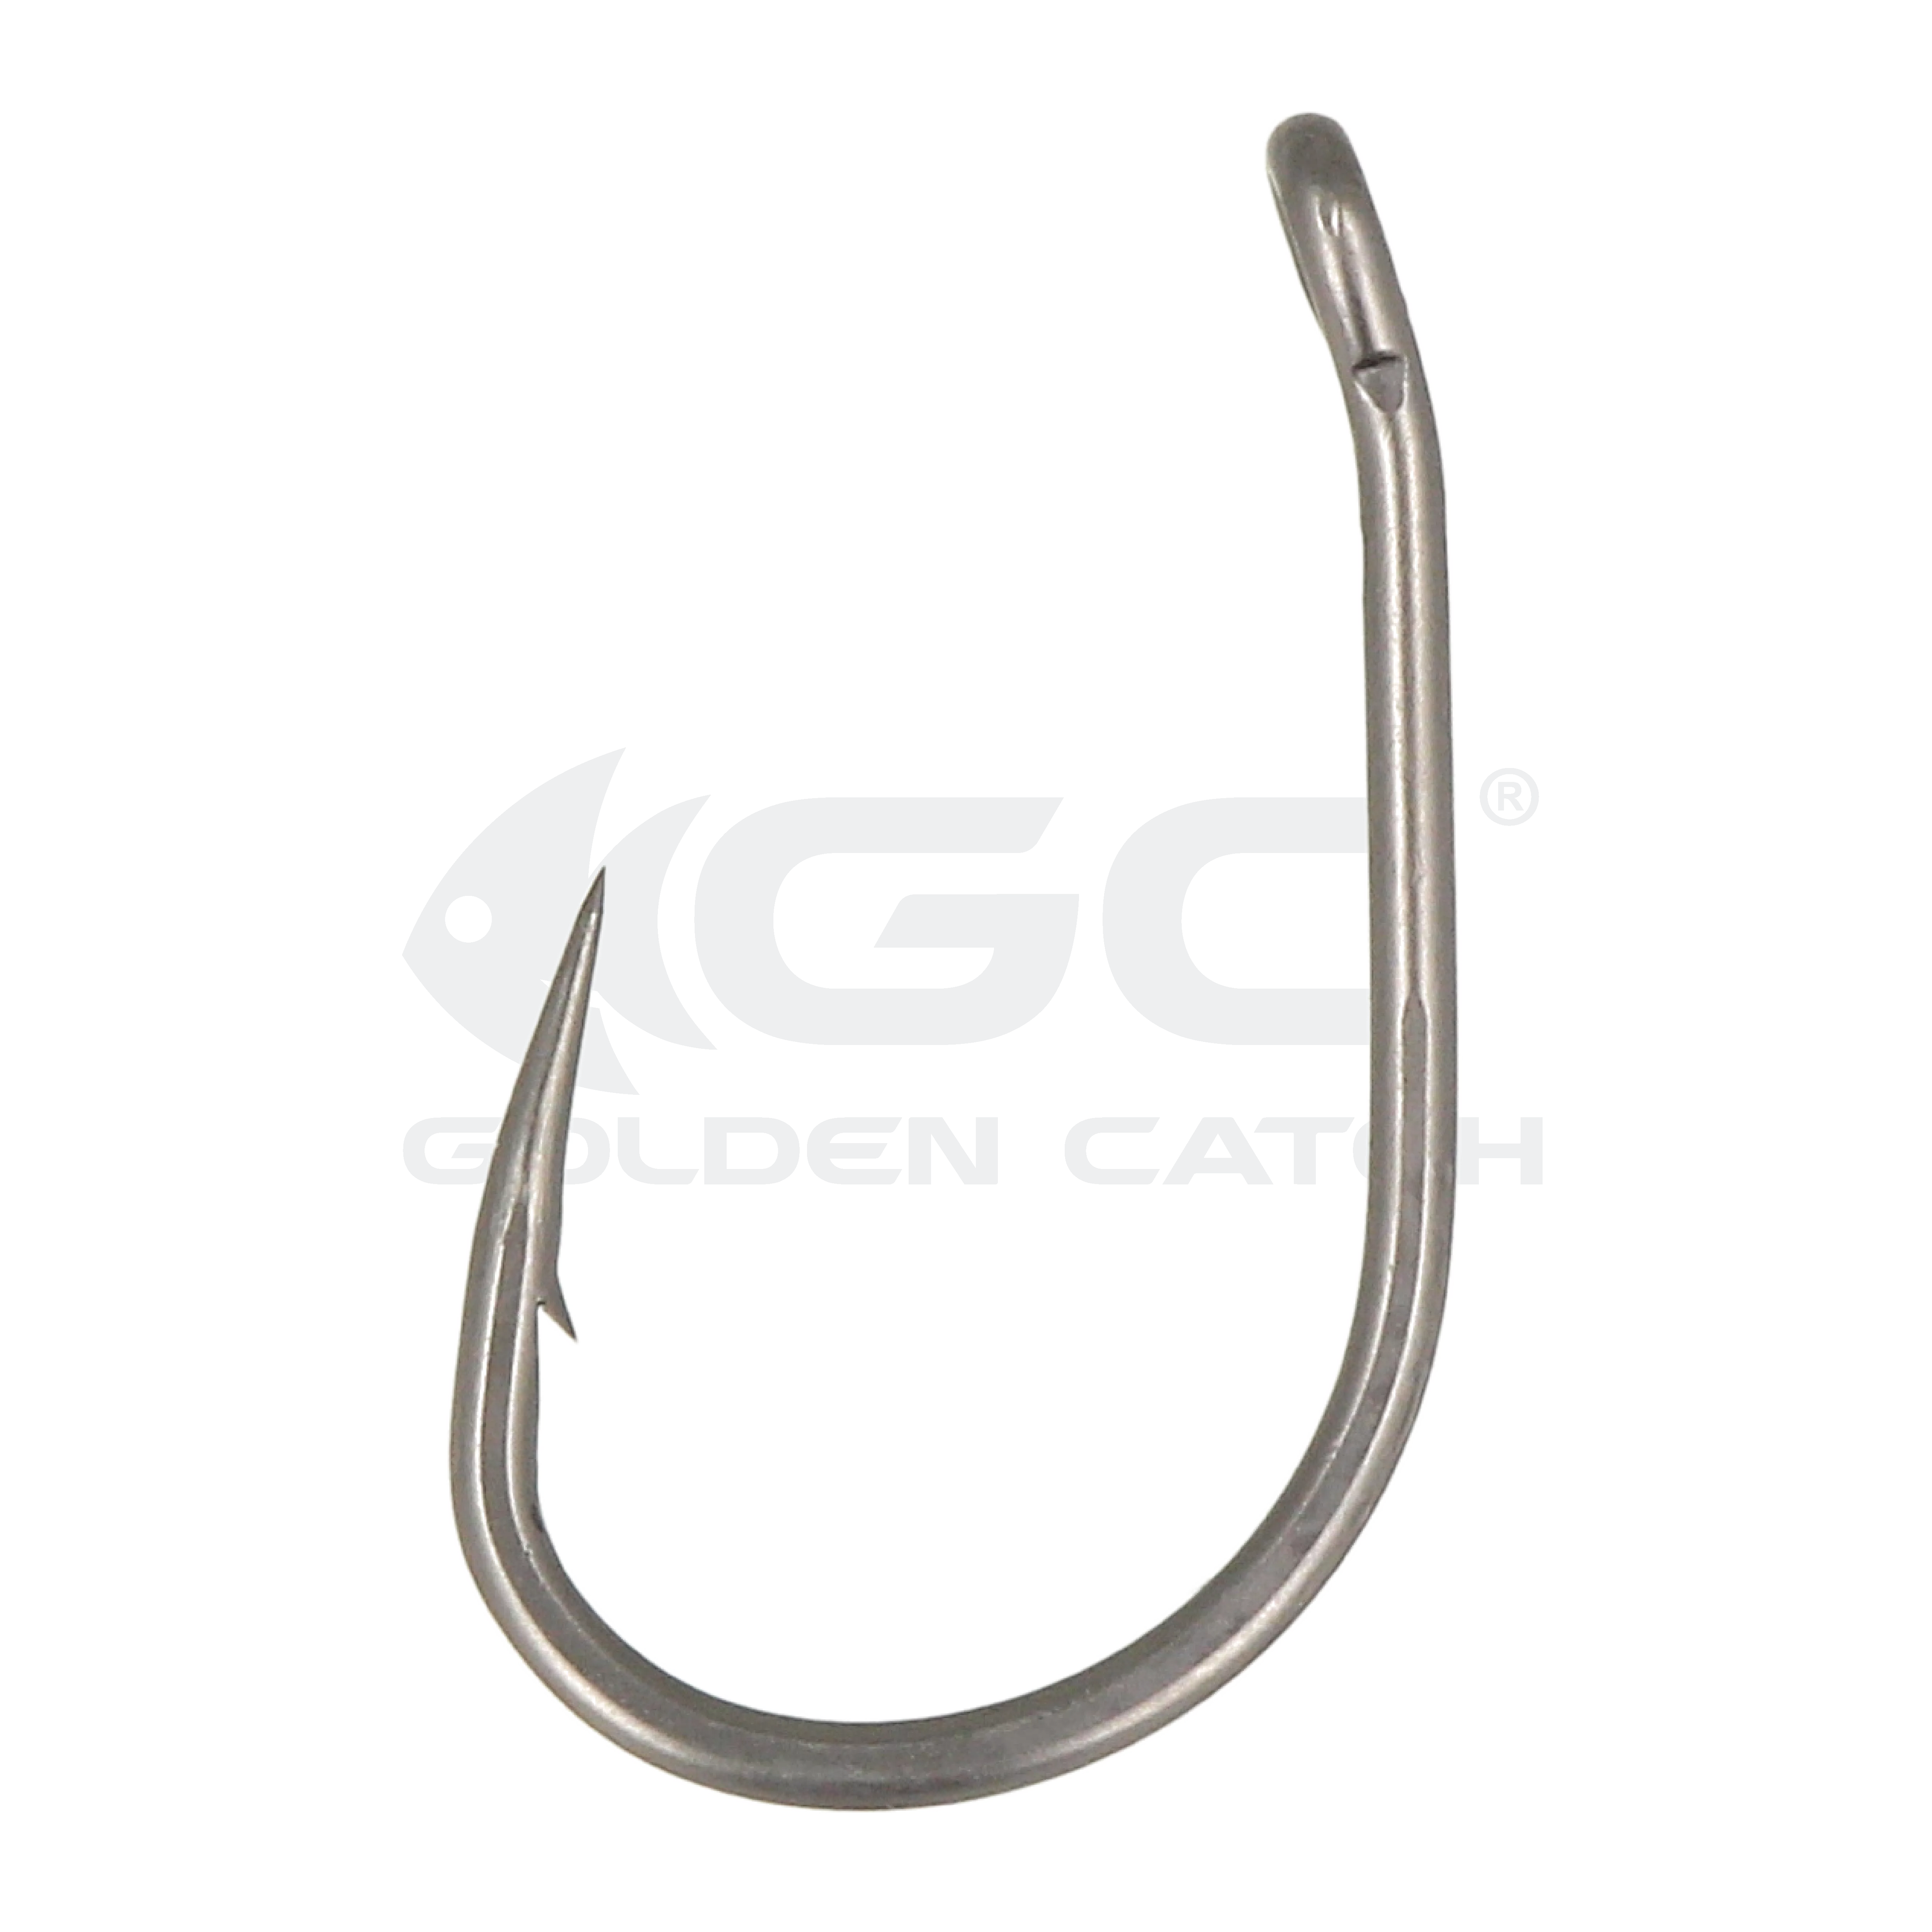 Golden Catch G.Carp Hook Wide Gape TF: check it out on the